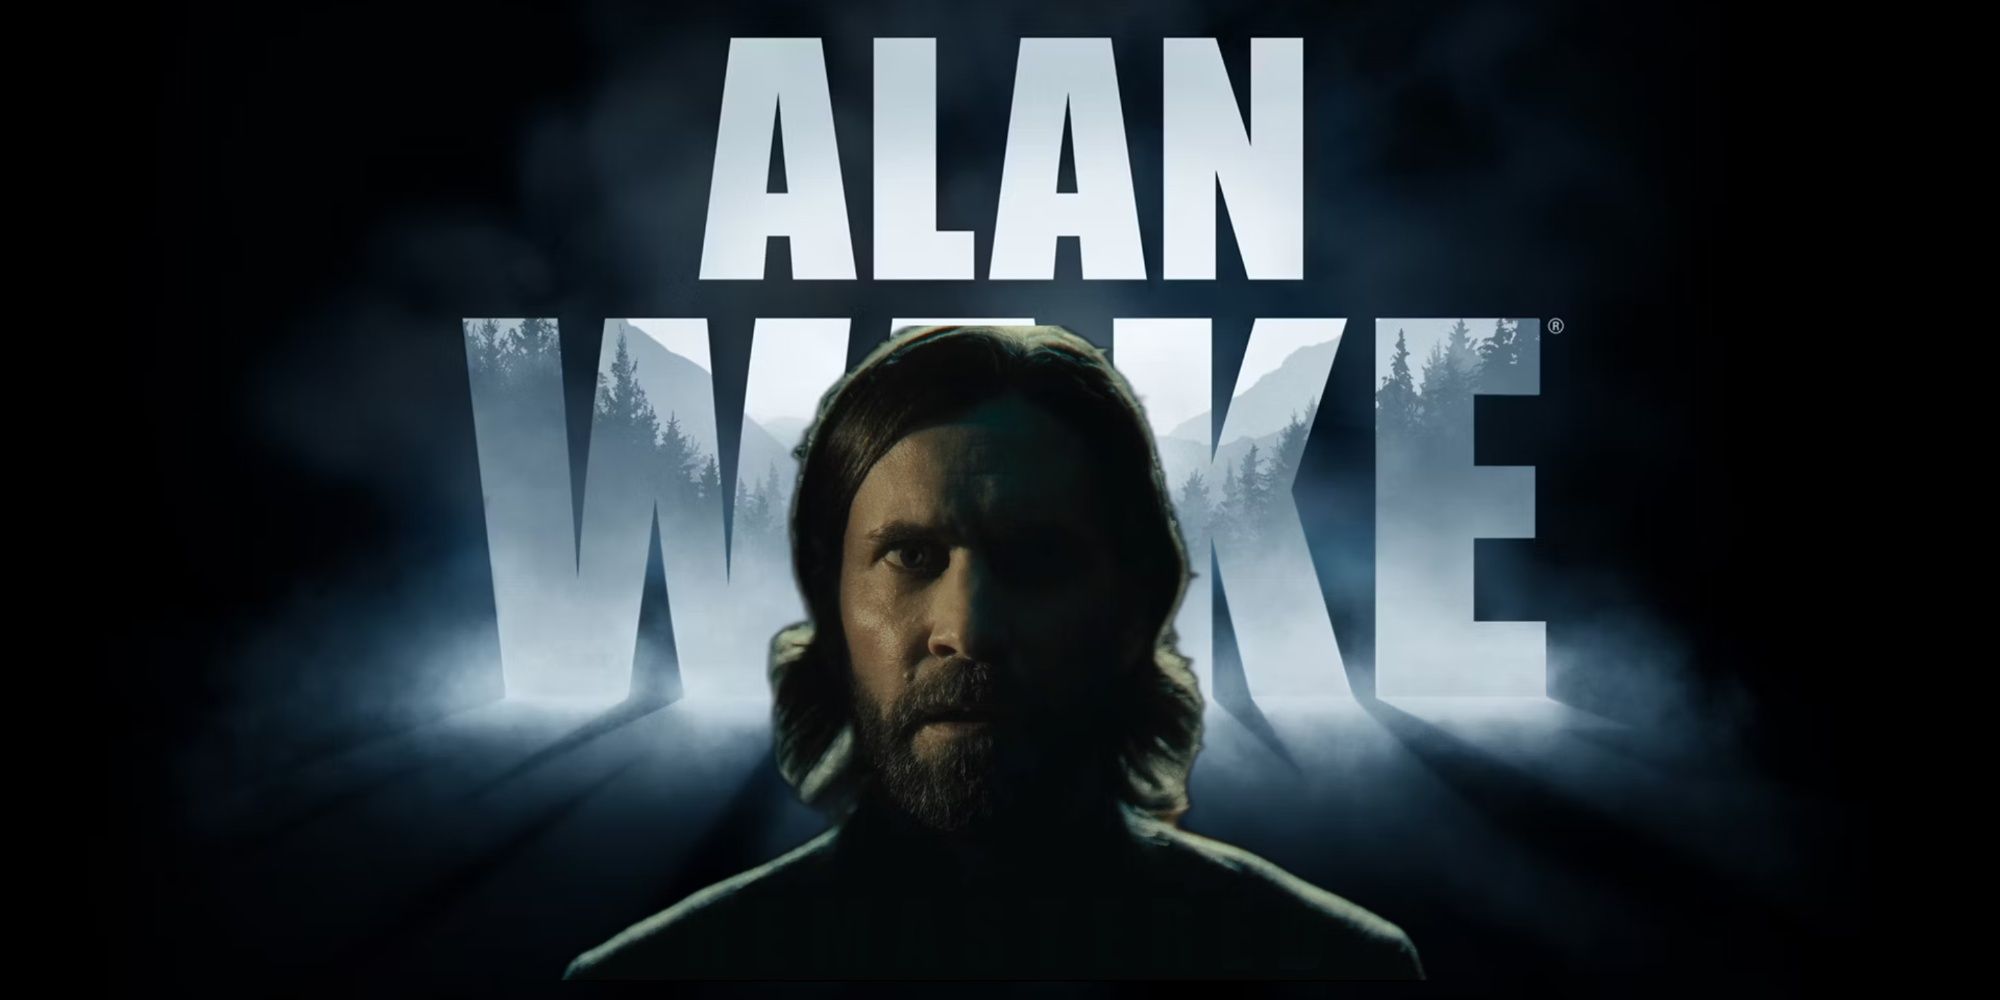 Alan Wake 2's live-action character placed over the old Alan inside the 'A' on the cover art for Alan Wake Remastered.